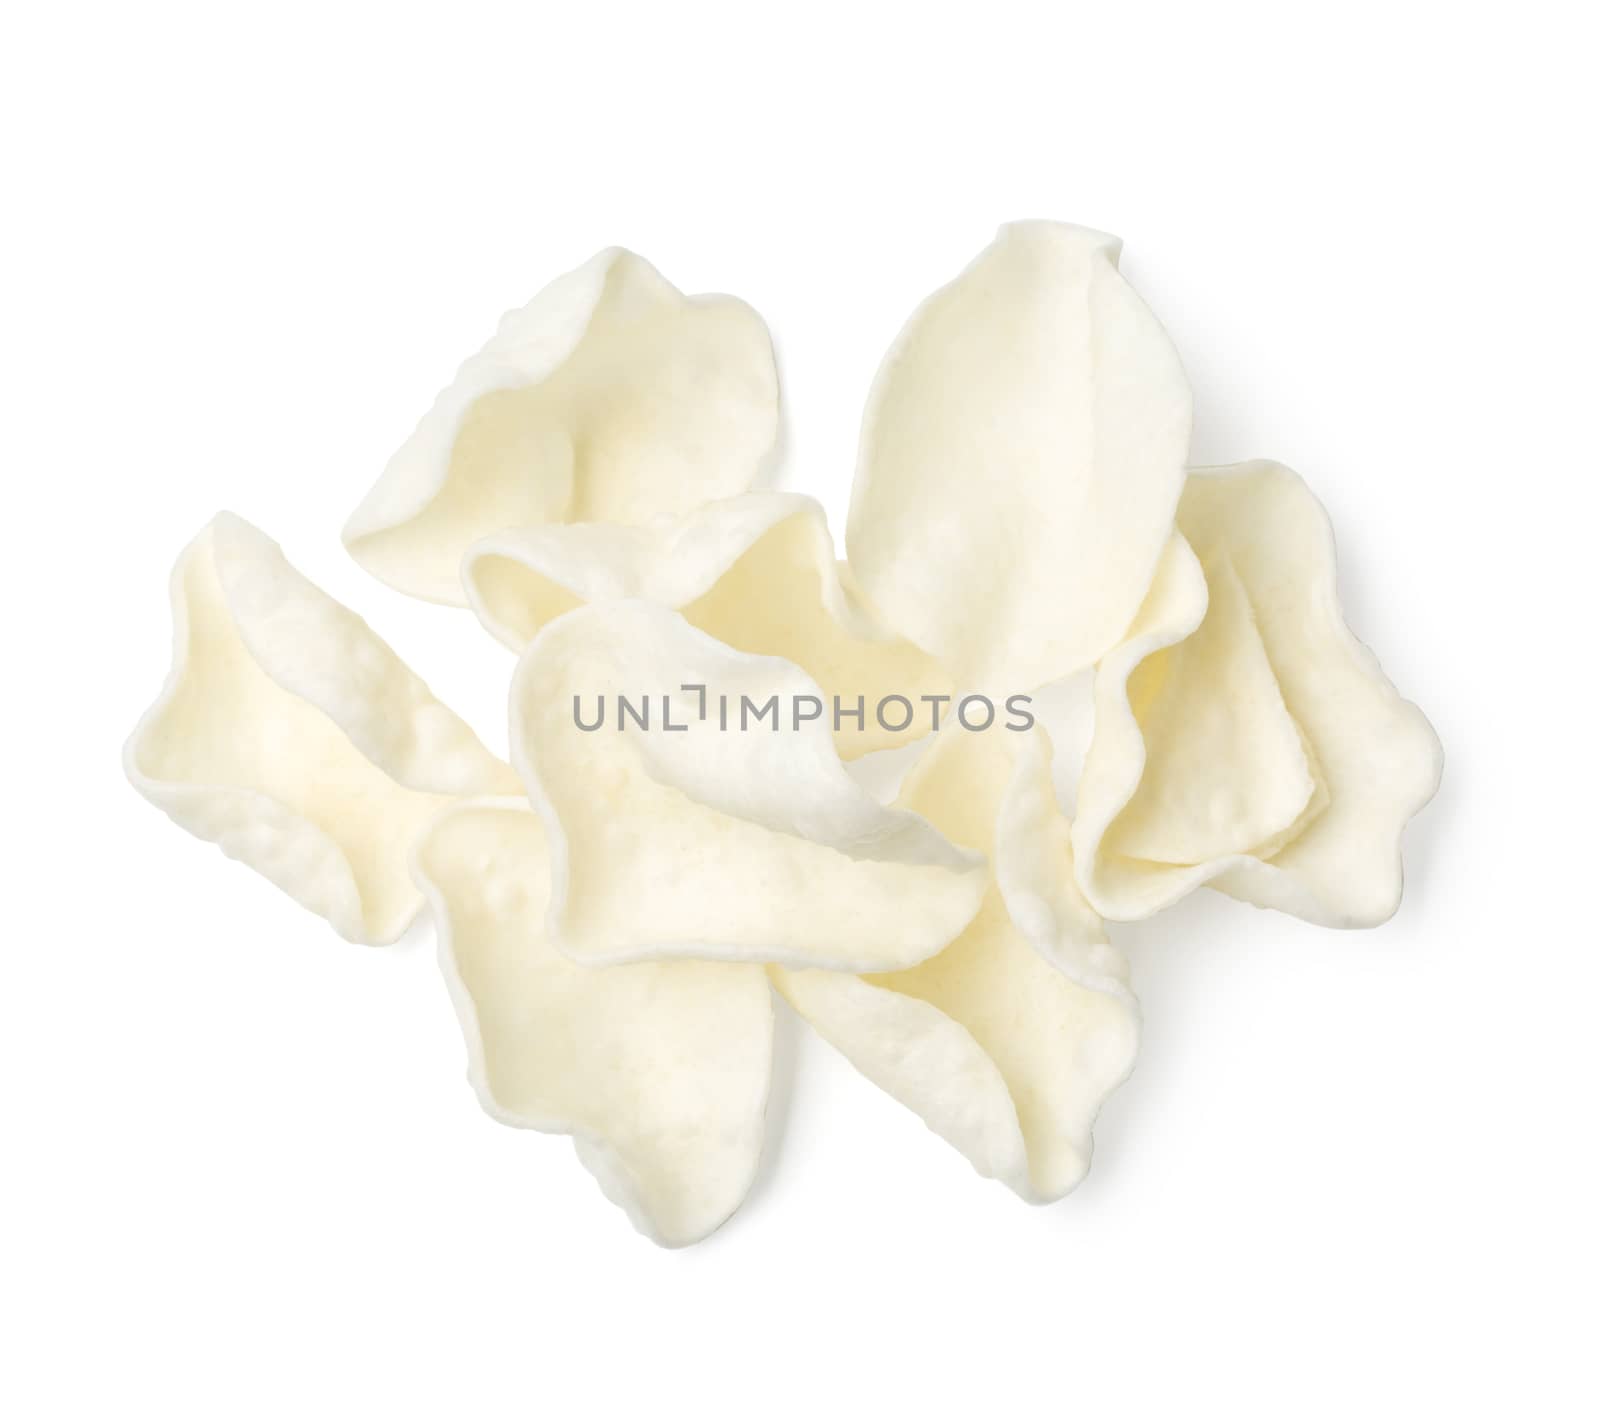  White Potato chips isolated on white, clipping path included